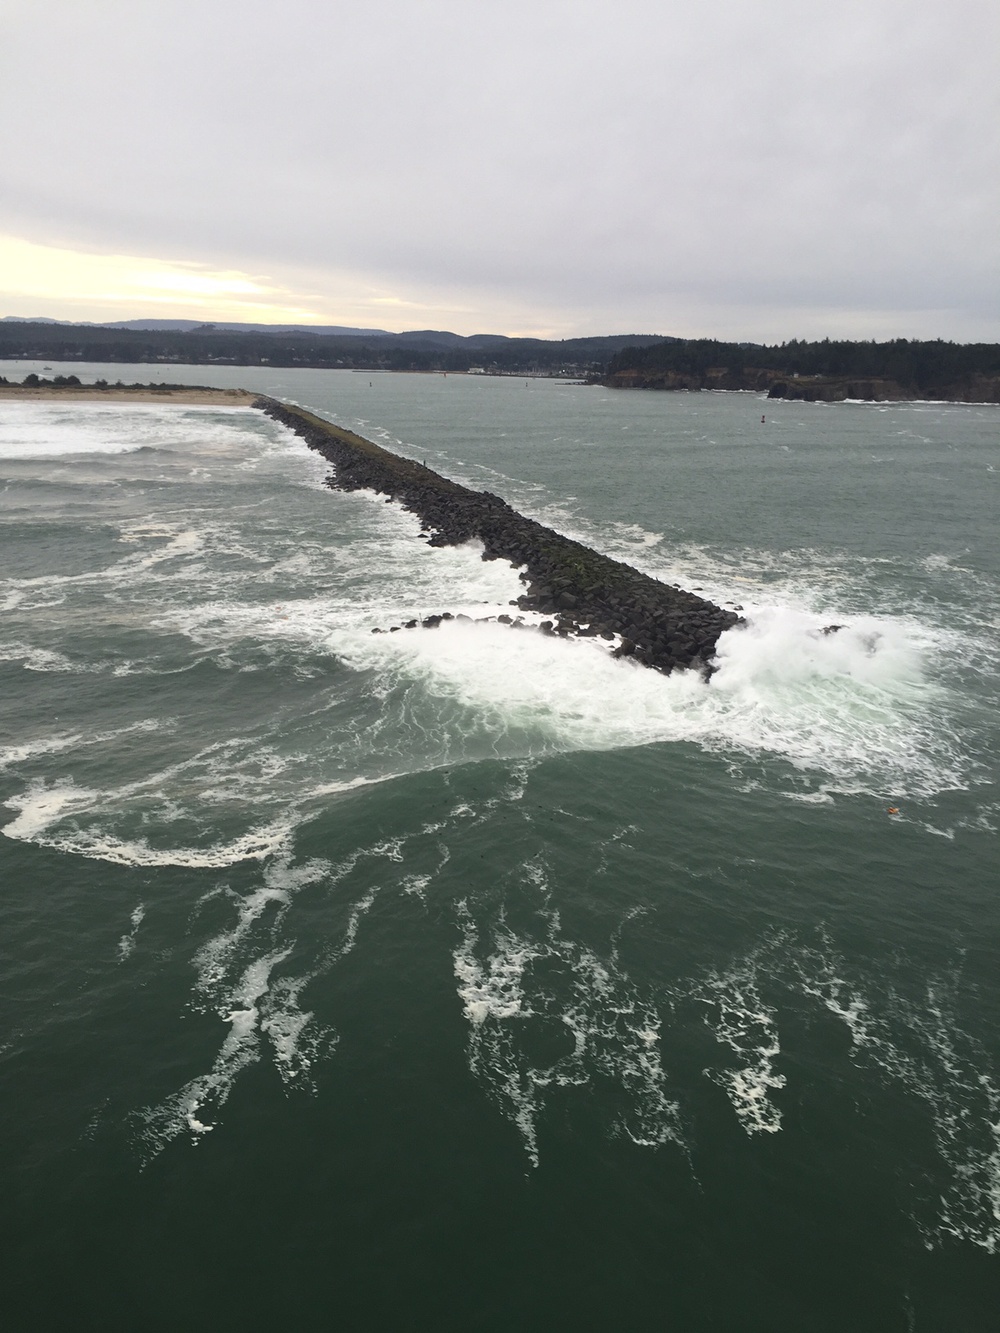 Coast Guard crews search for missing fishermen near Coos Bay, Ore.